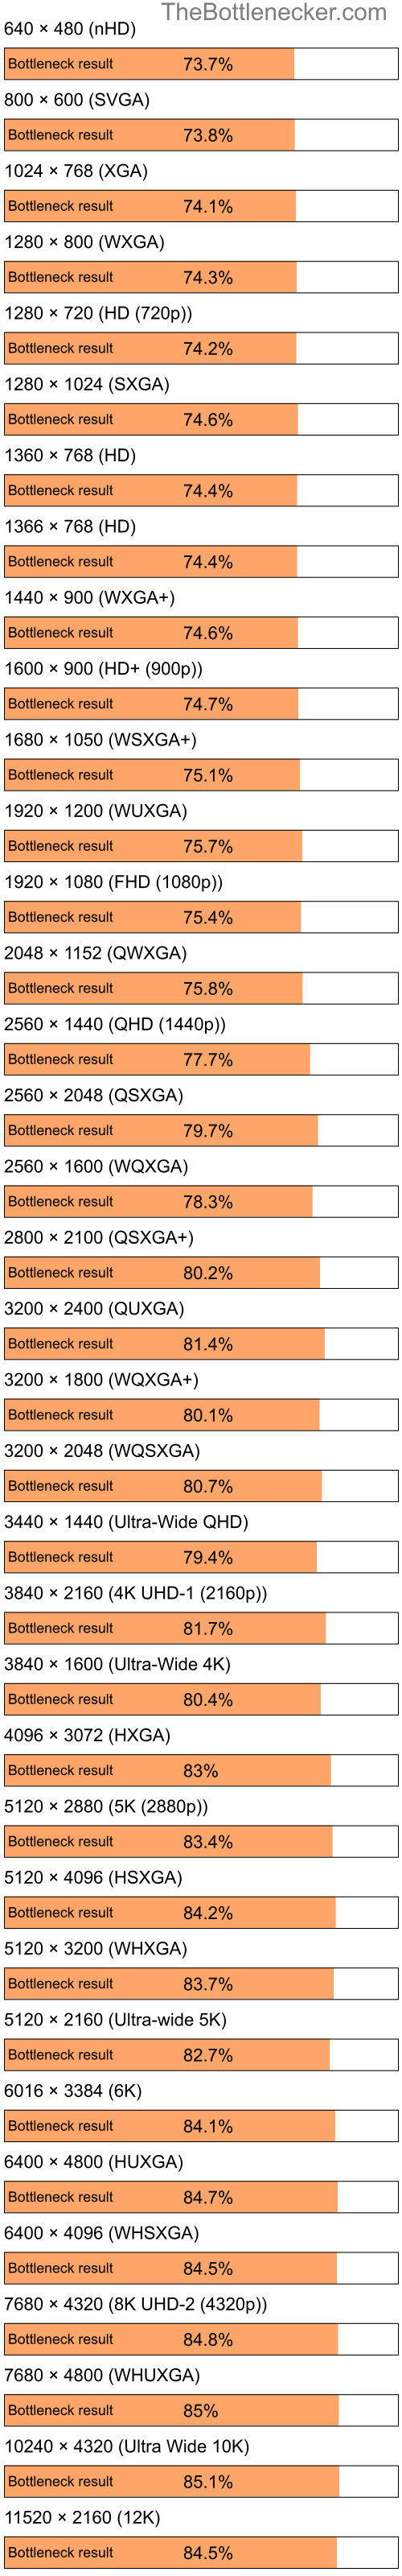 Bottleneck results by resolution for Intel Pentium 4 and AMD Radeon X1300 in Graphic Card Intense Tasks